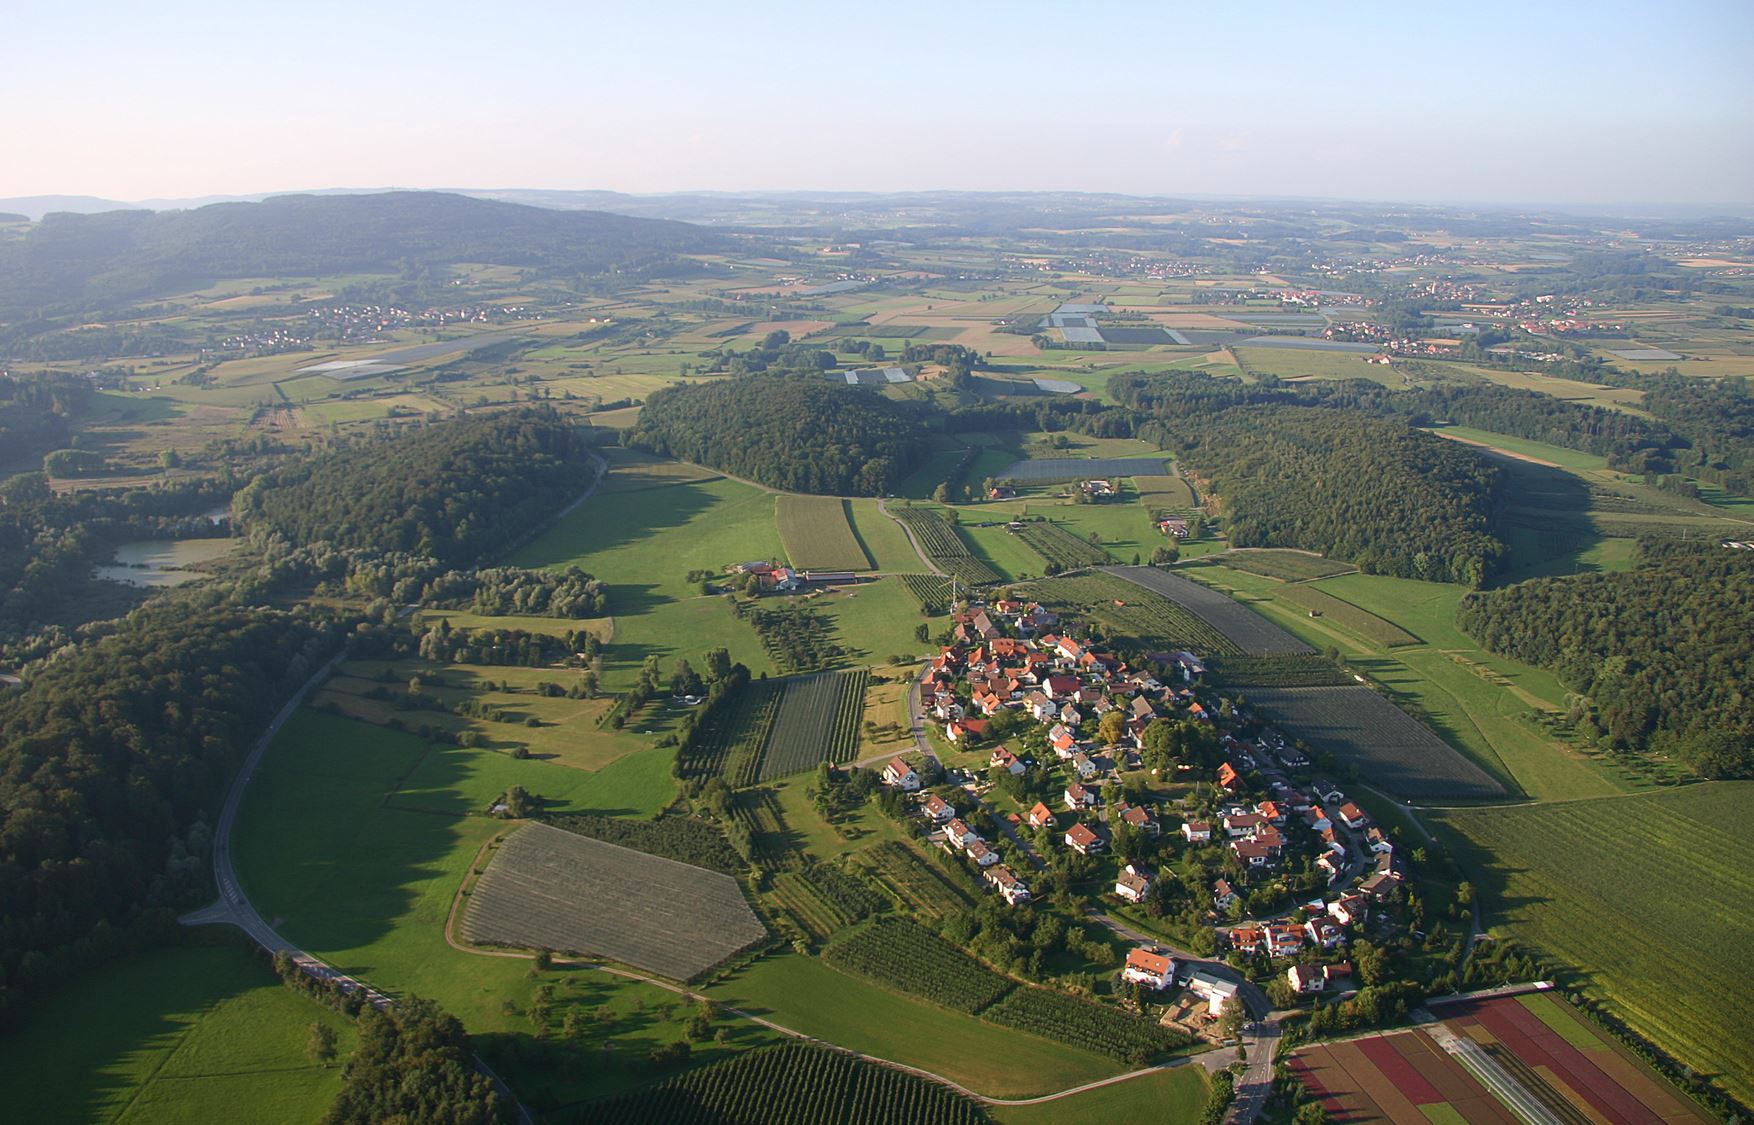 Aerial photograph of a small town surrounded by green landscape; numerous elongated asymmetrical teardrop-shaped hills are seen surrounding the town, which is also located on a small ridge.